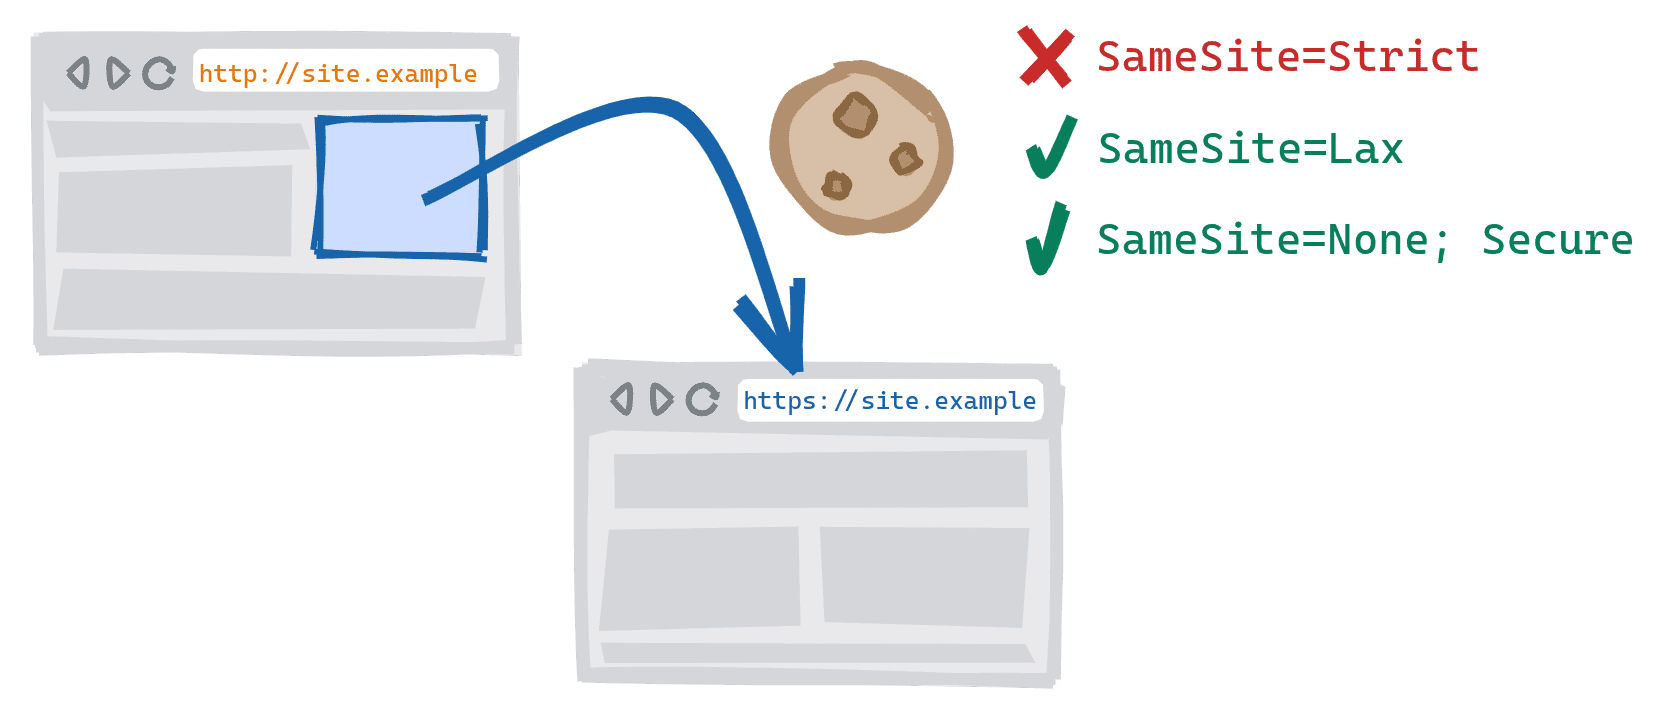 A cross-scheme navigation triggered by following a link on the insecure HTTP version of a site to the secure HTTPS version. SameSite=Strict cookies blocked, SameSite=Lax and SameSite=None; Secure cookies are allowed.